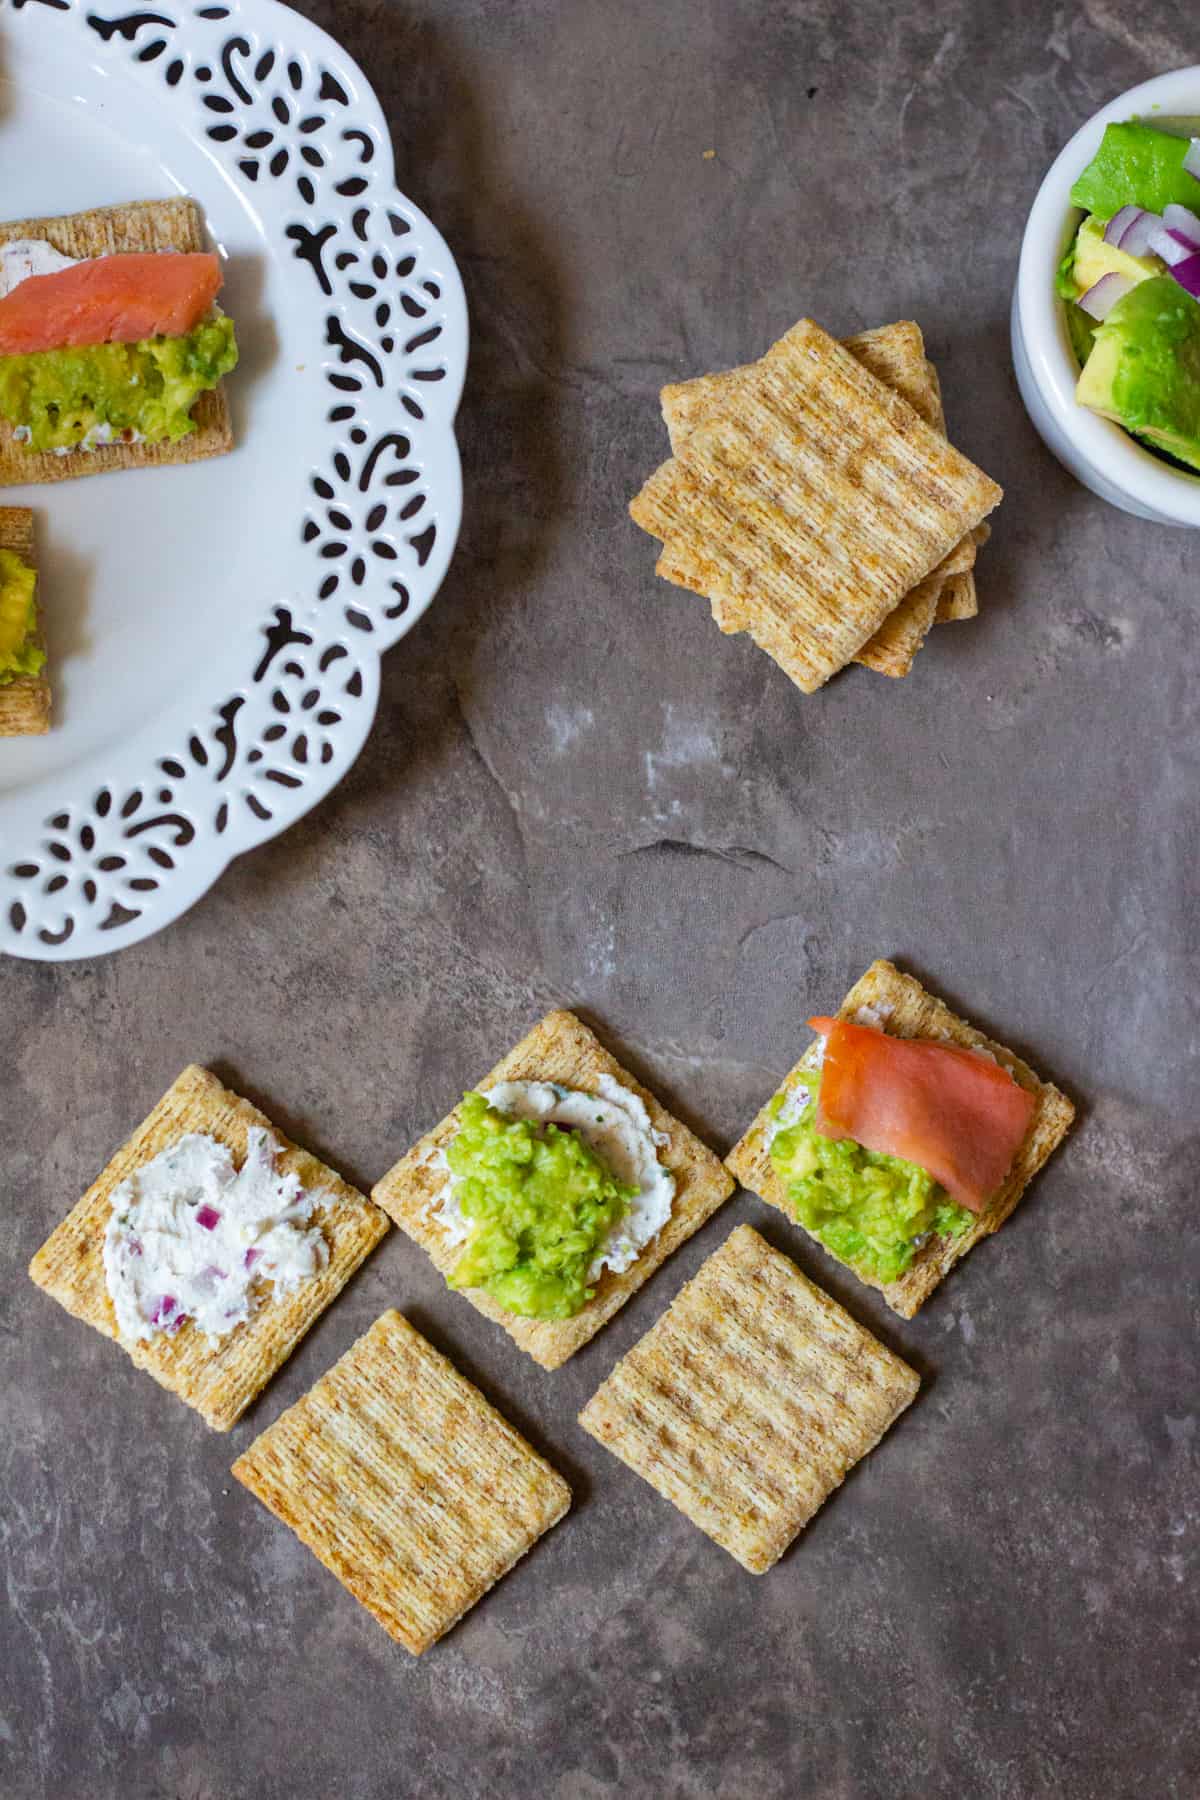 Have your guests go WOW with these Salmon Avocado bites! The smoked salmon pairs very well with goat cheese and smoked gouda crackers!